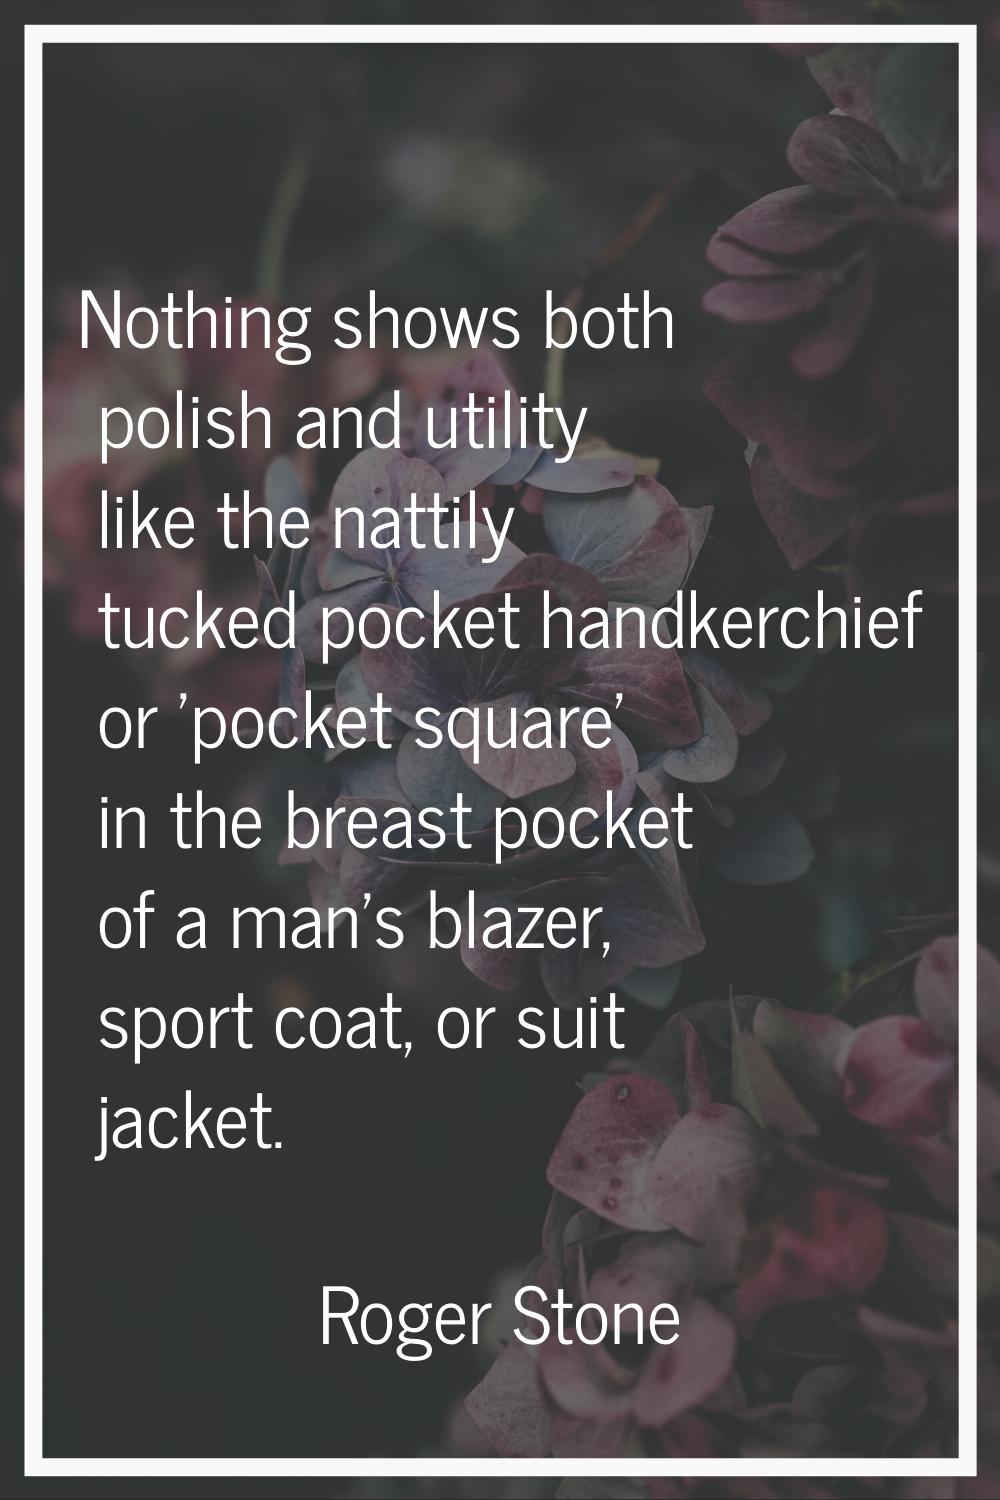 Nothing shows both polish and utility like the nattily tucked pocket handkerchief or 'pocket square